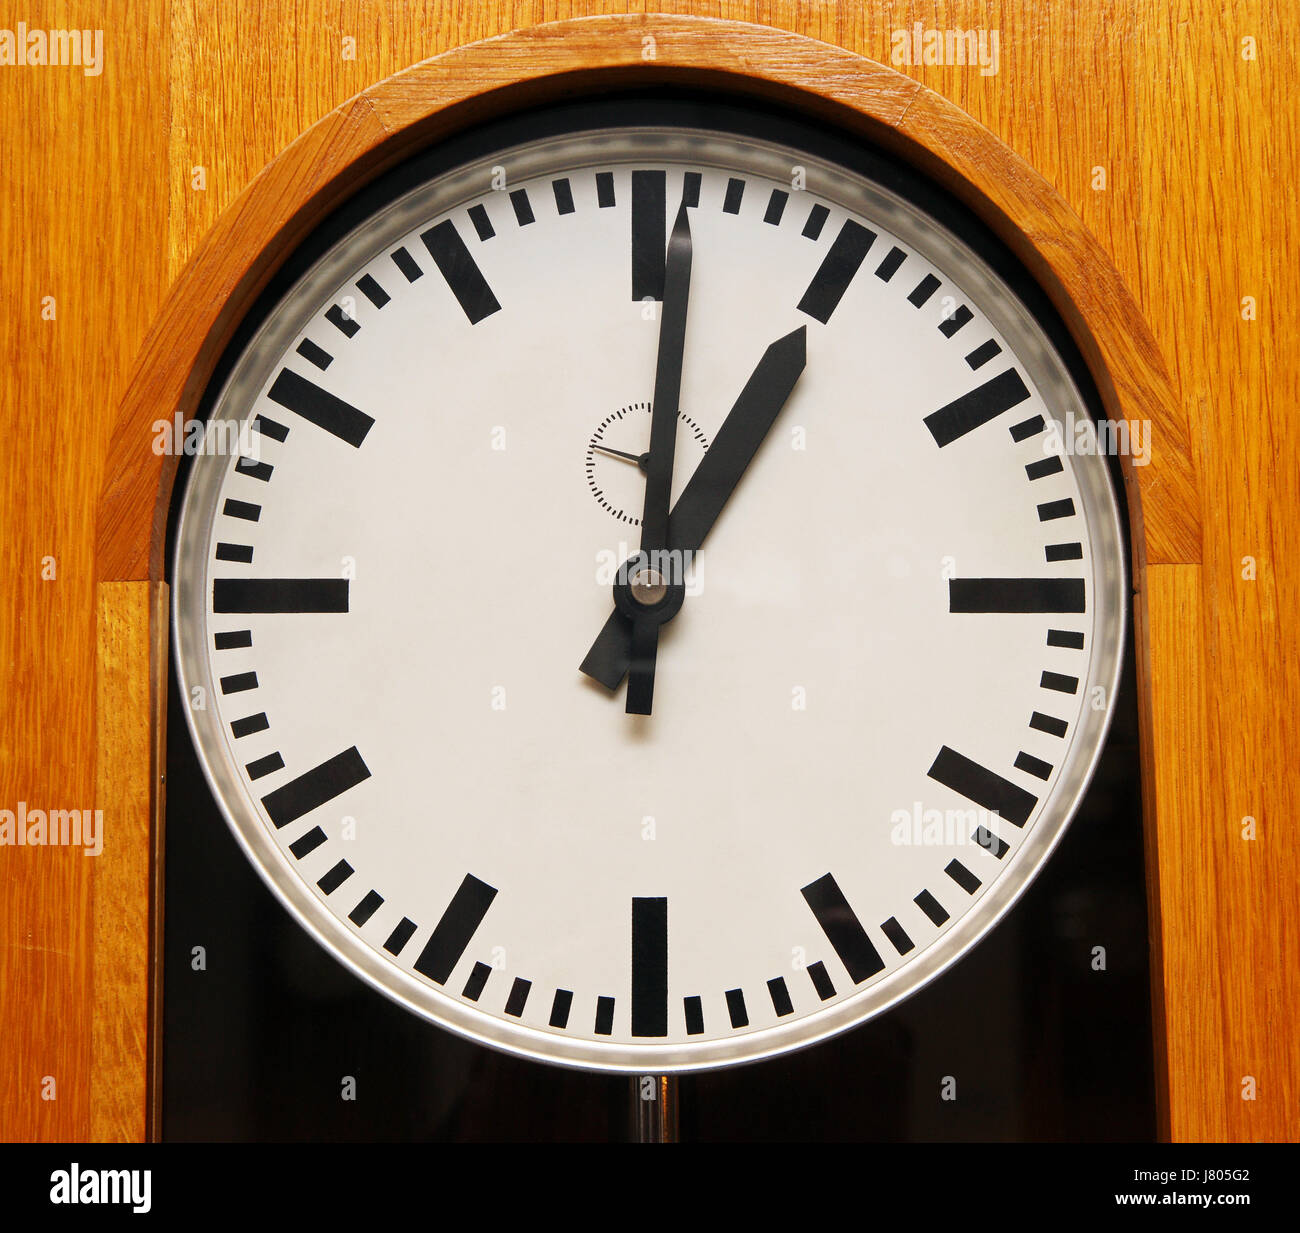 Accurate Pendulum Clock High Resolution Stock Photography and Images - Alamy